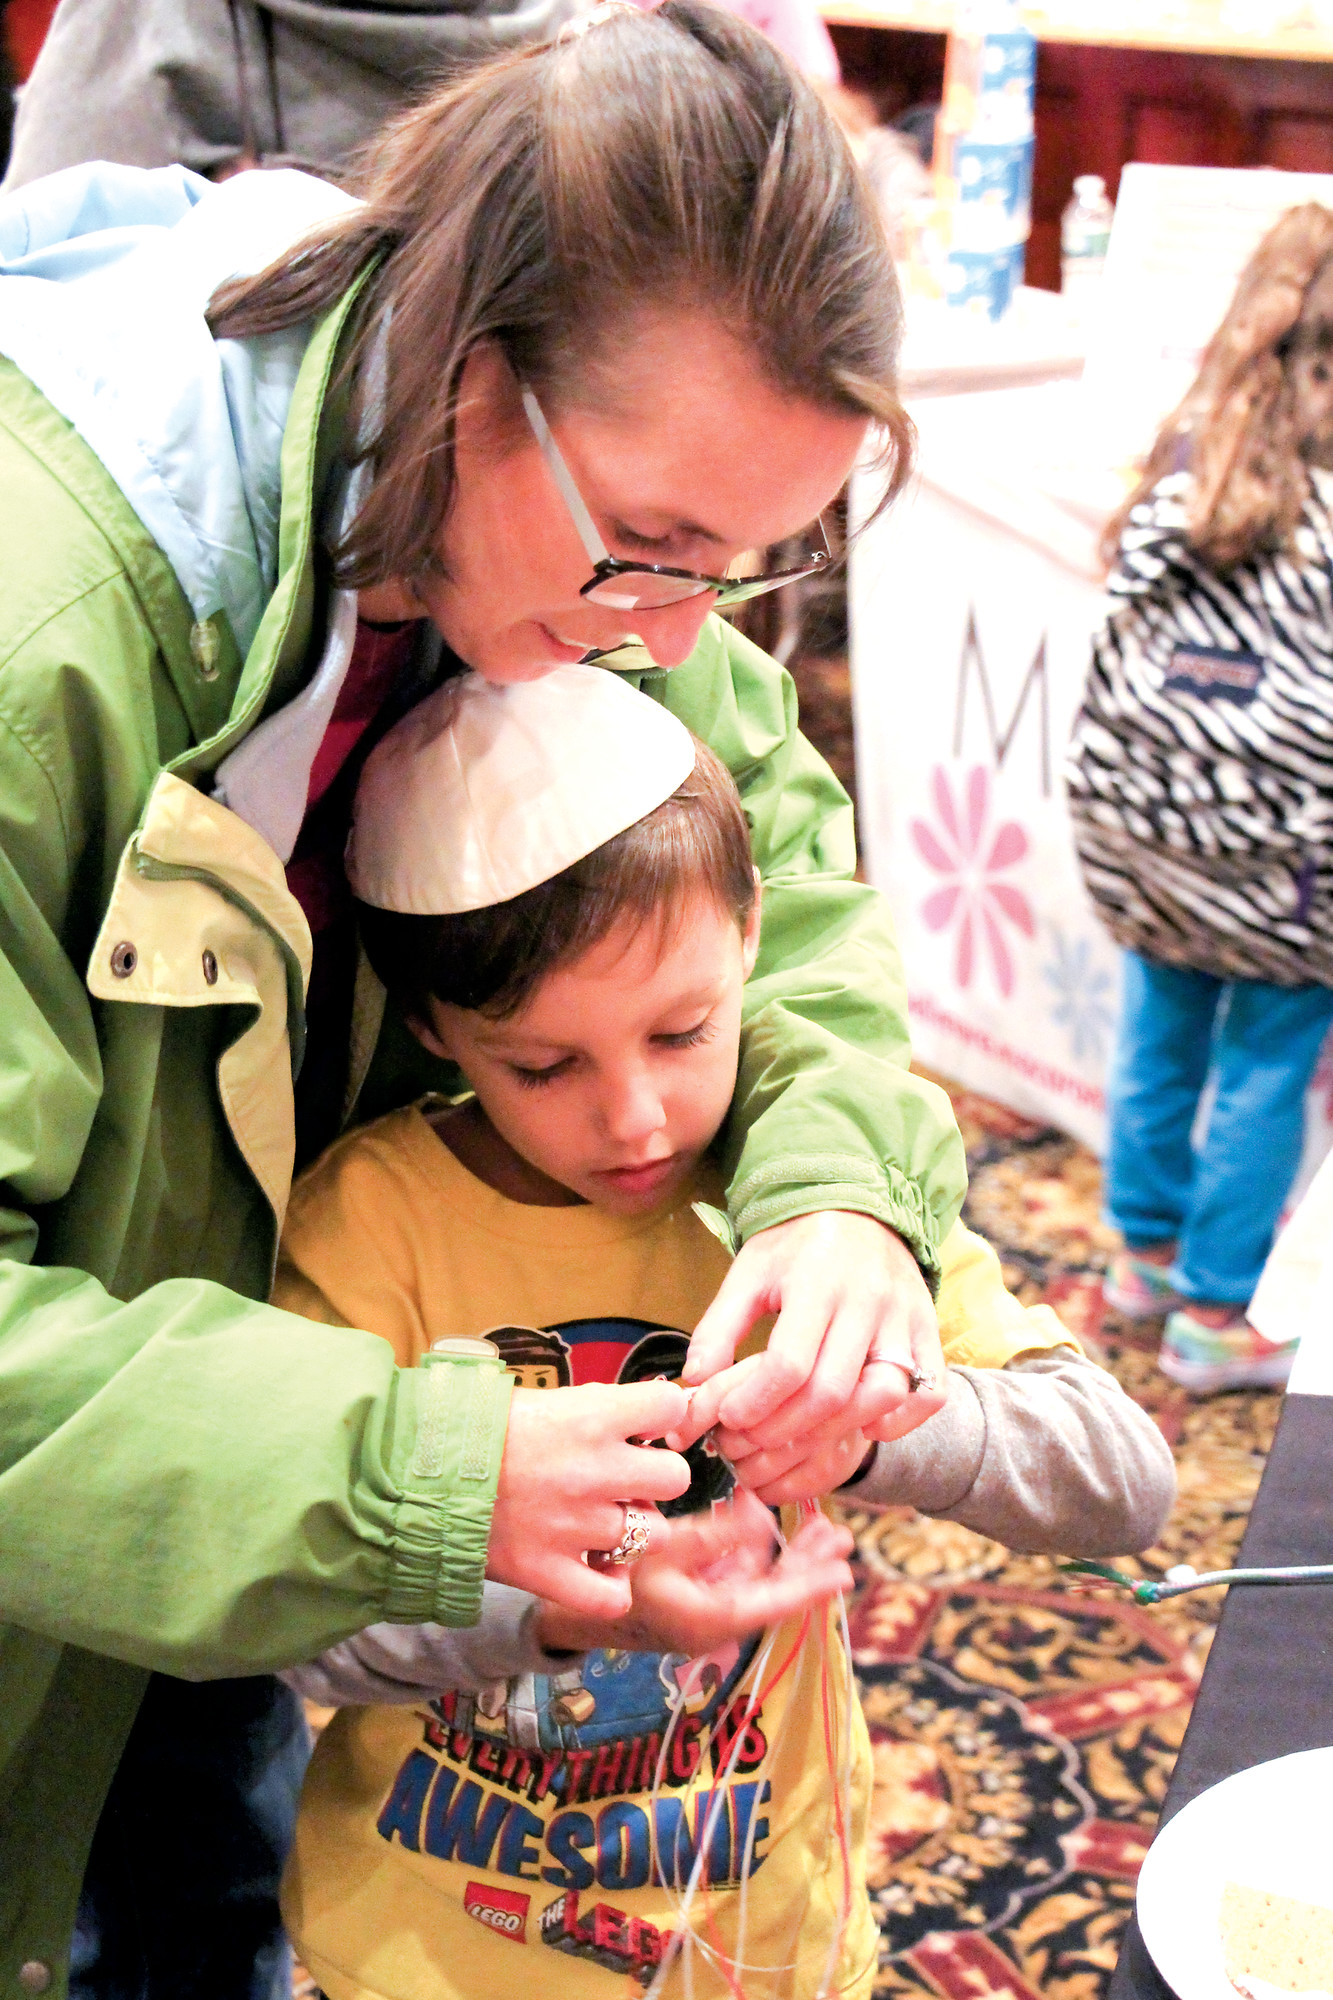 Kirsten Rachaf helped her son, Benjamin, 5, make a keychain at one of the many arts and crafts booths.